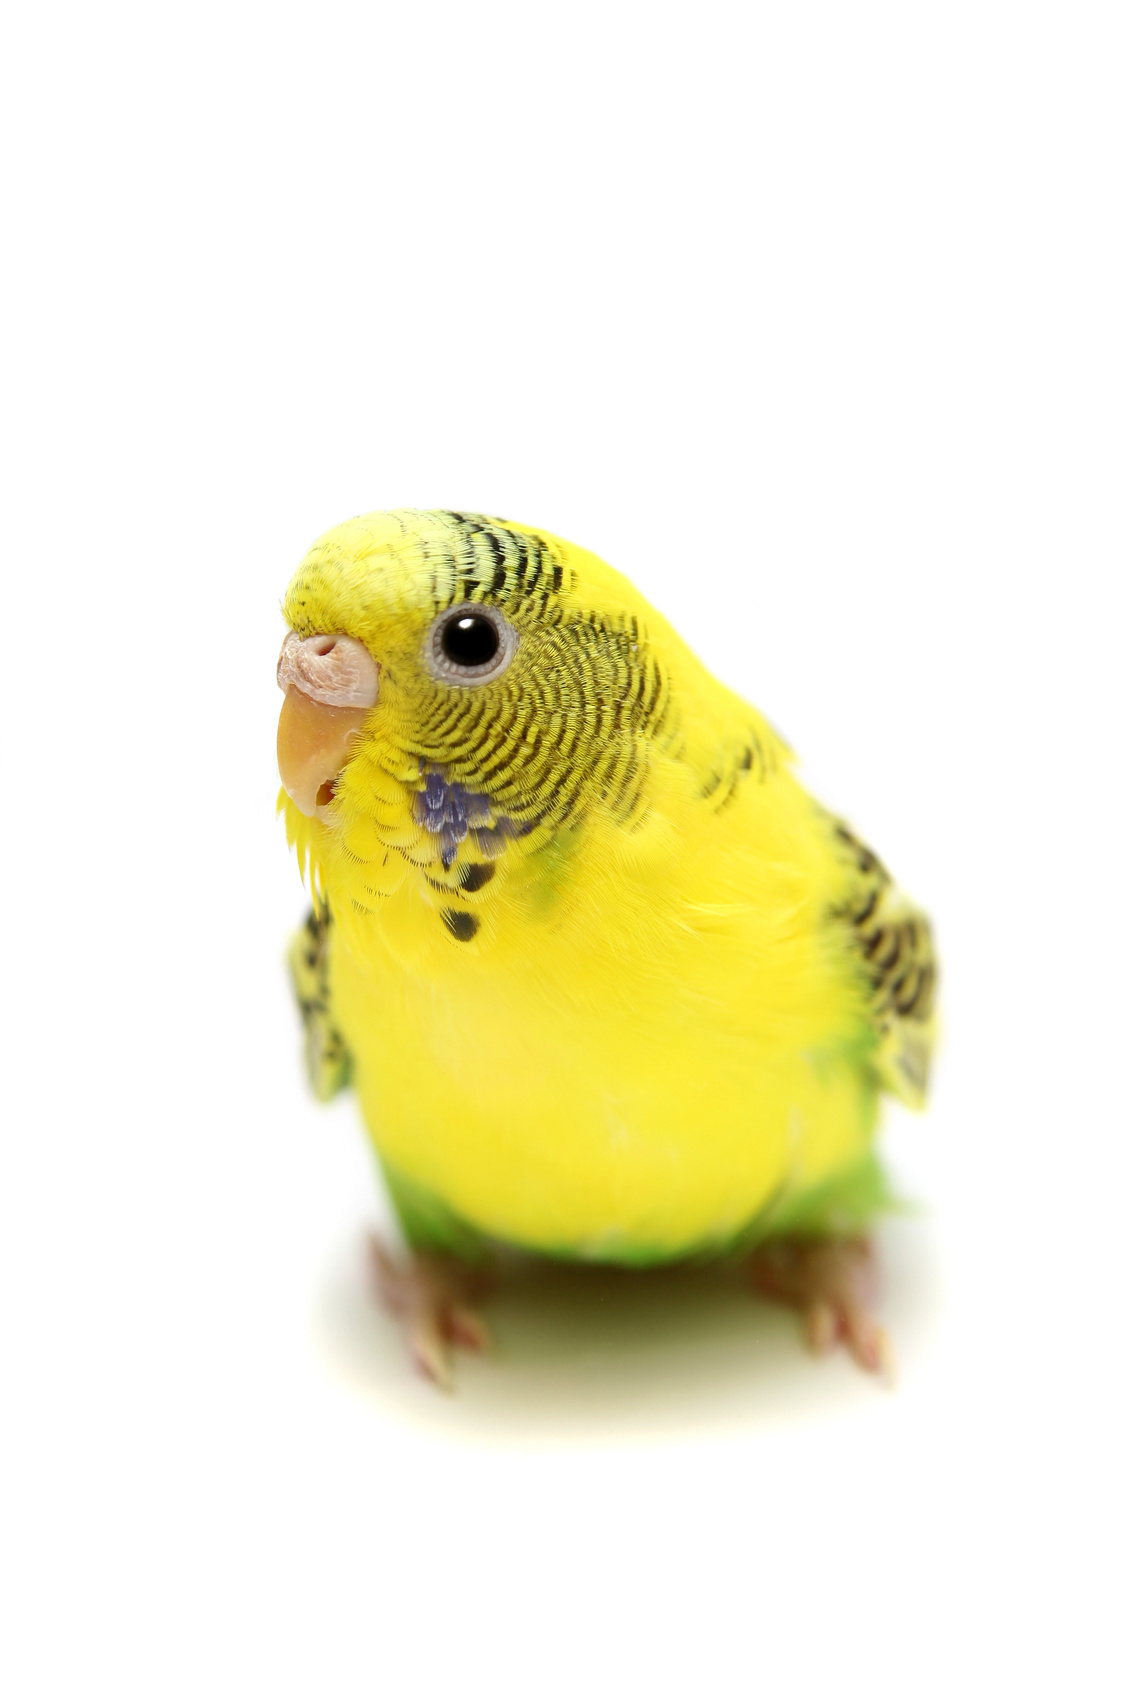 Budgie female on the white background